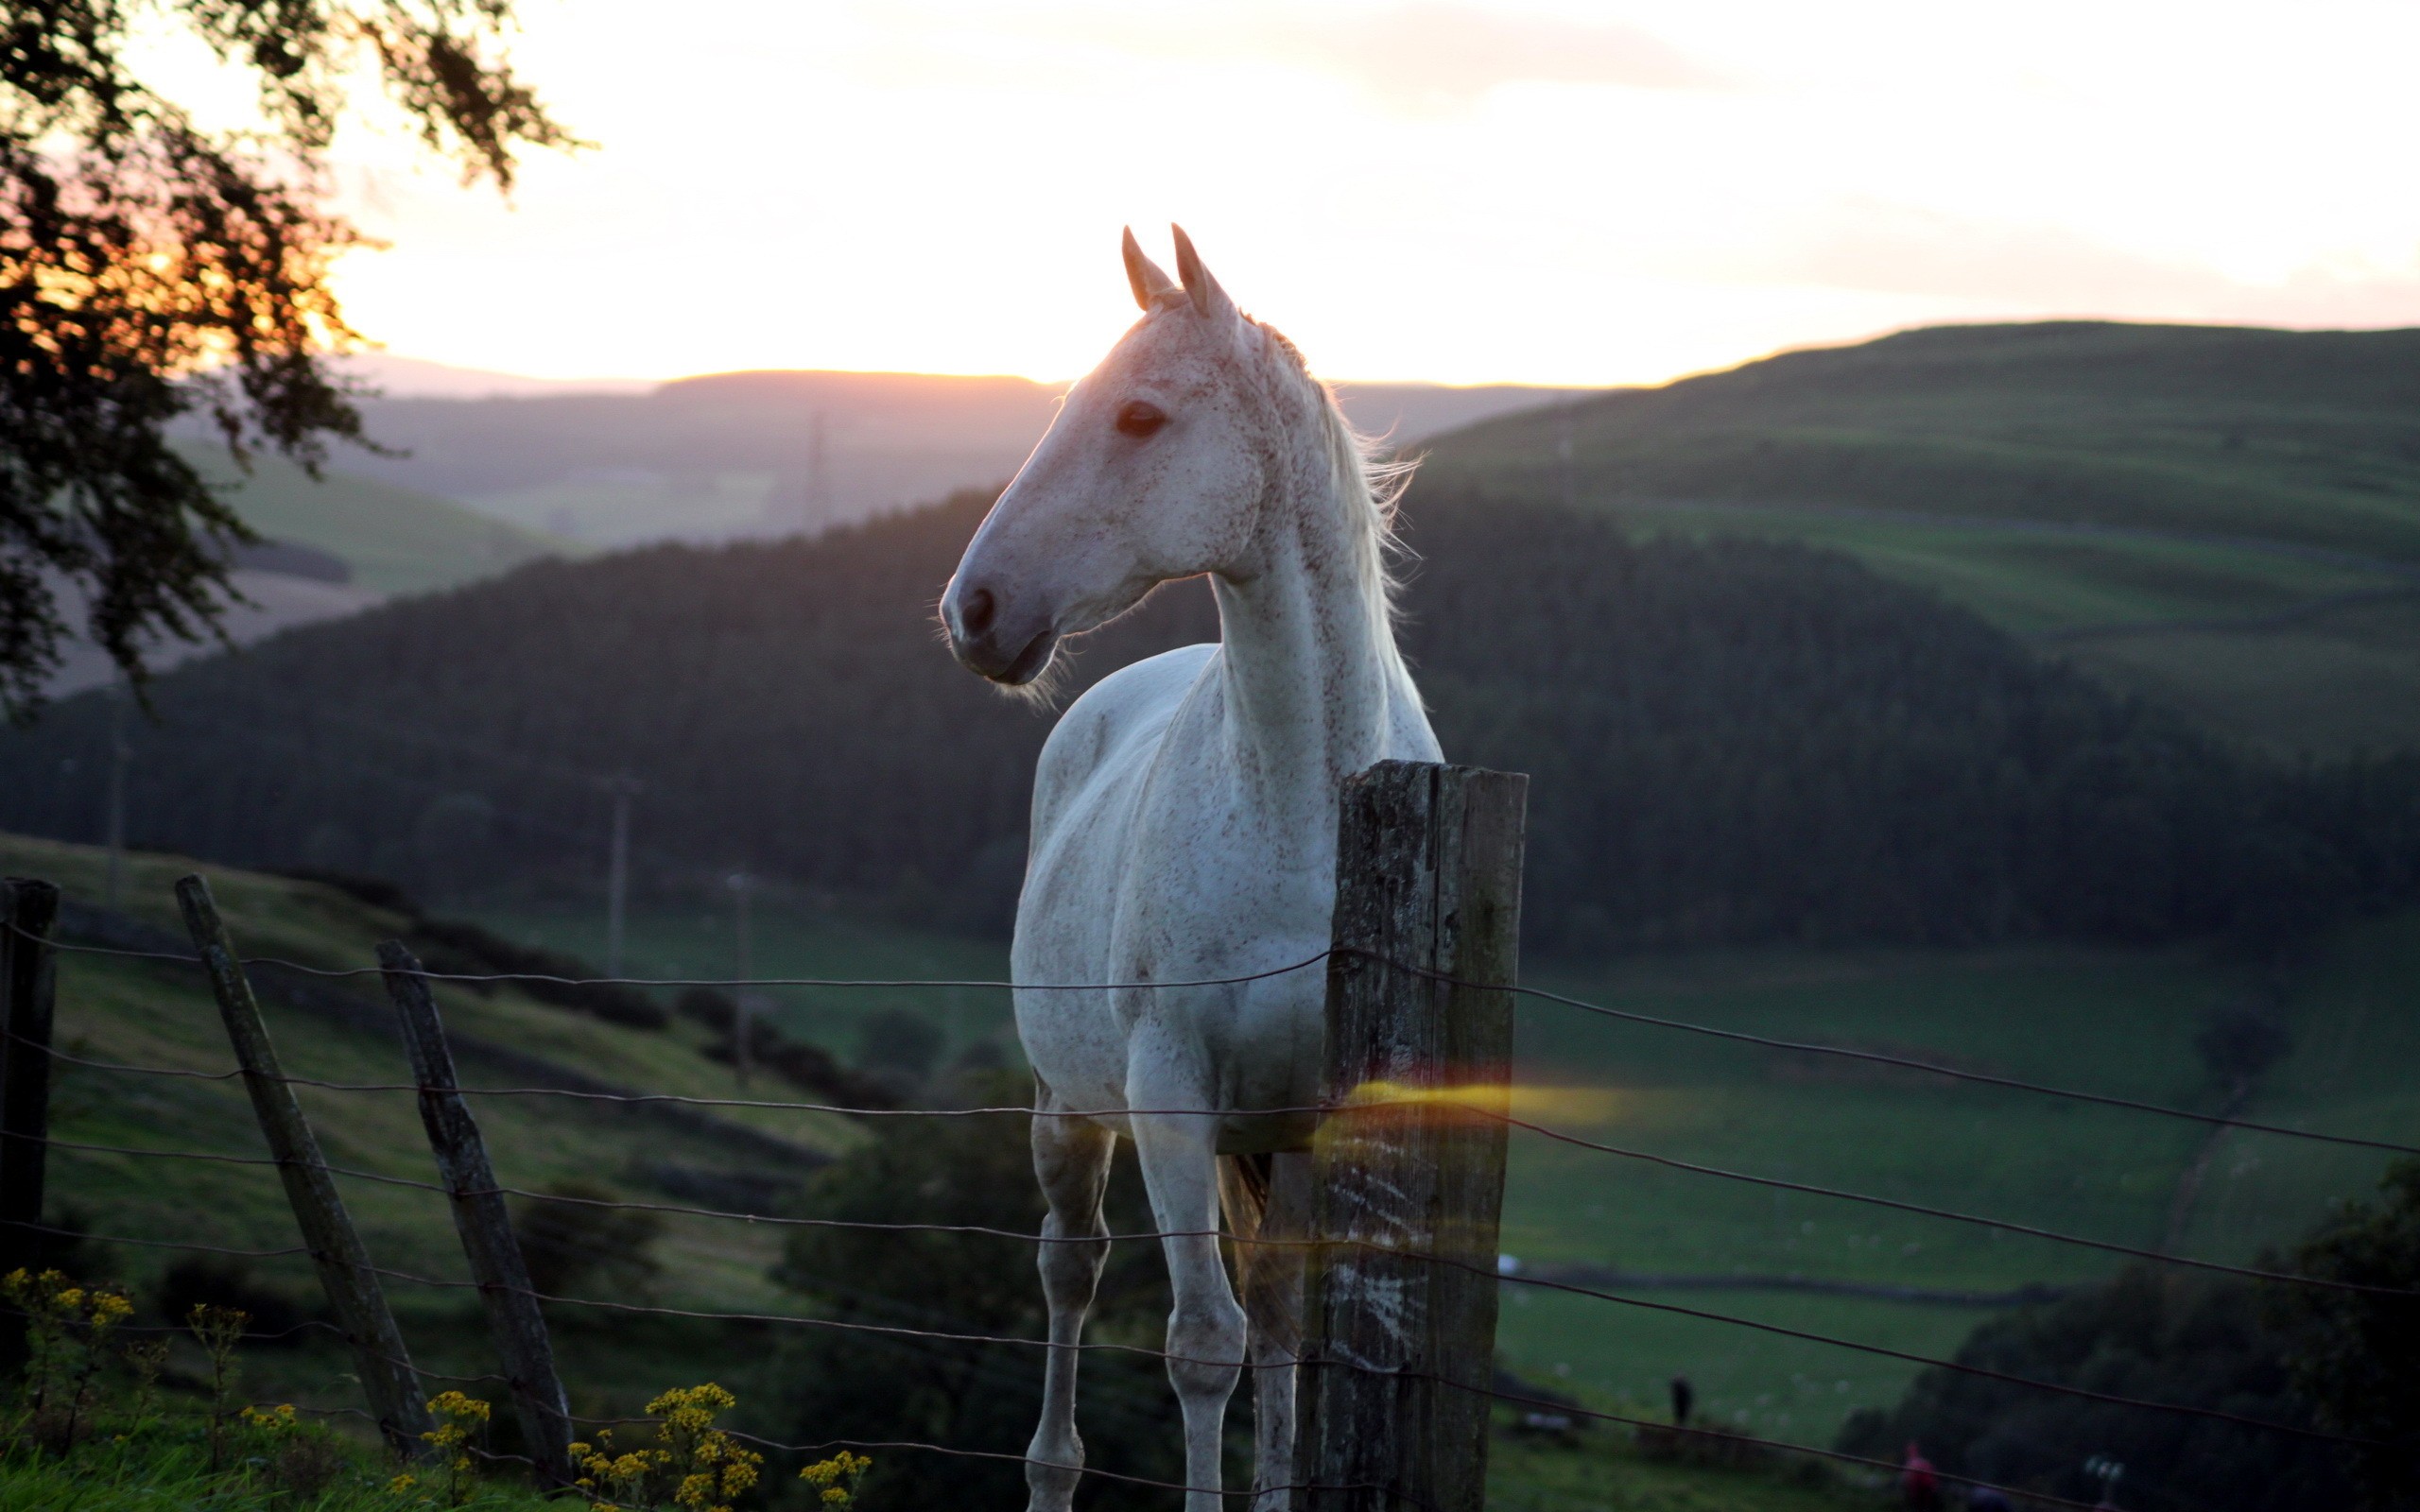 General 2560x1600 horse animals fence mammals outdoors